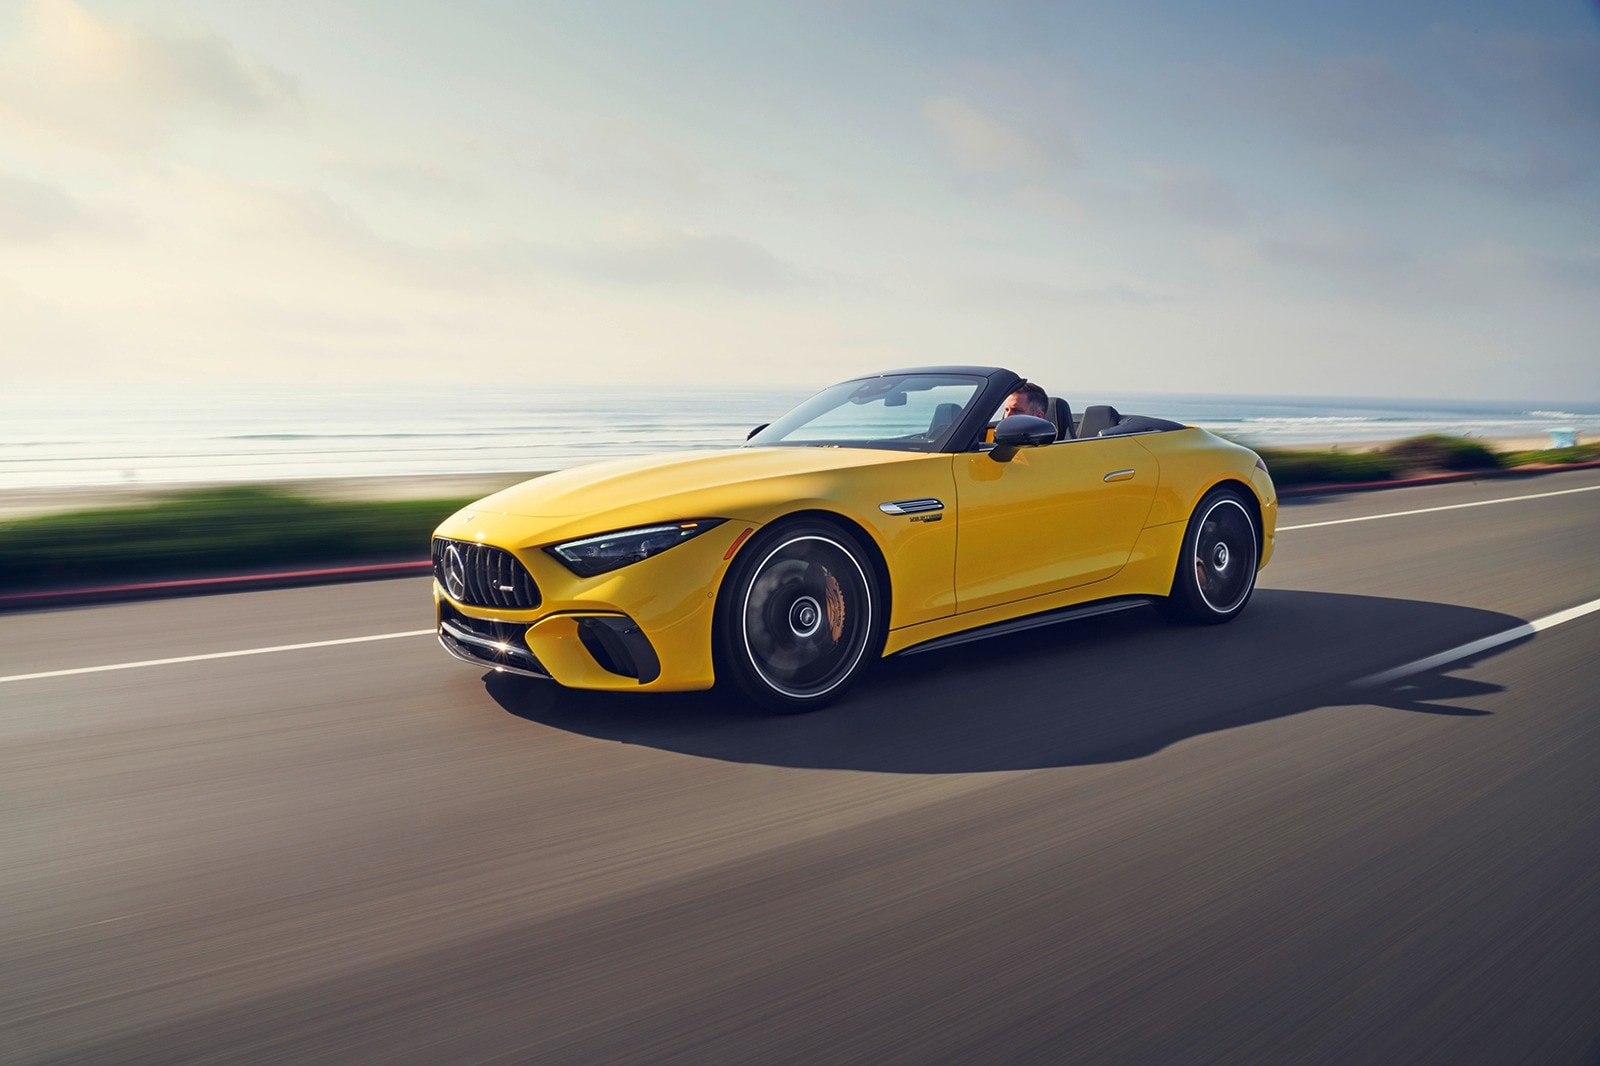 2022 Mercedes-AMG SL Finds an Elusive Balance Between Performance and Posh